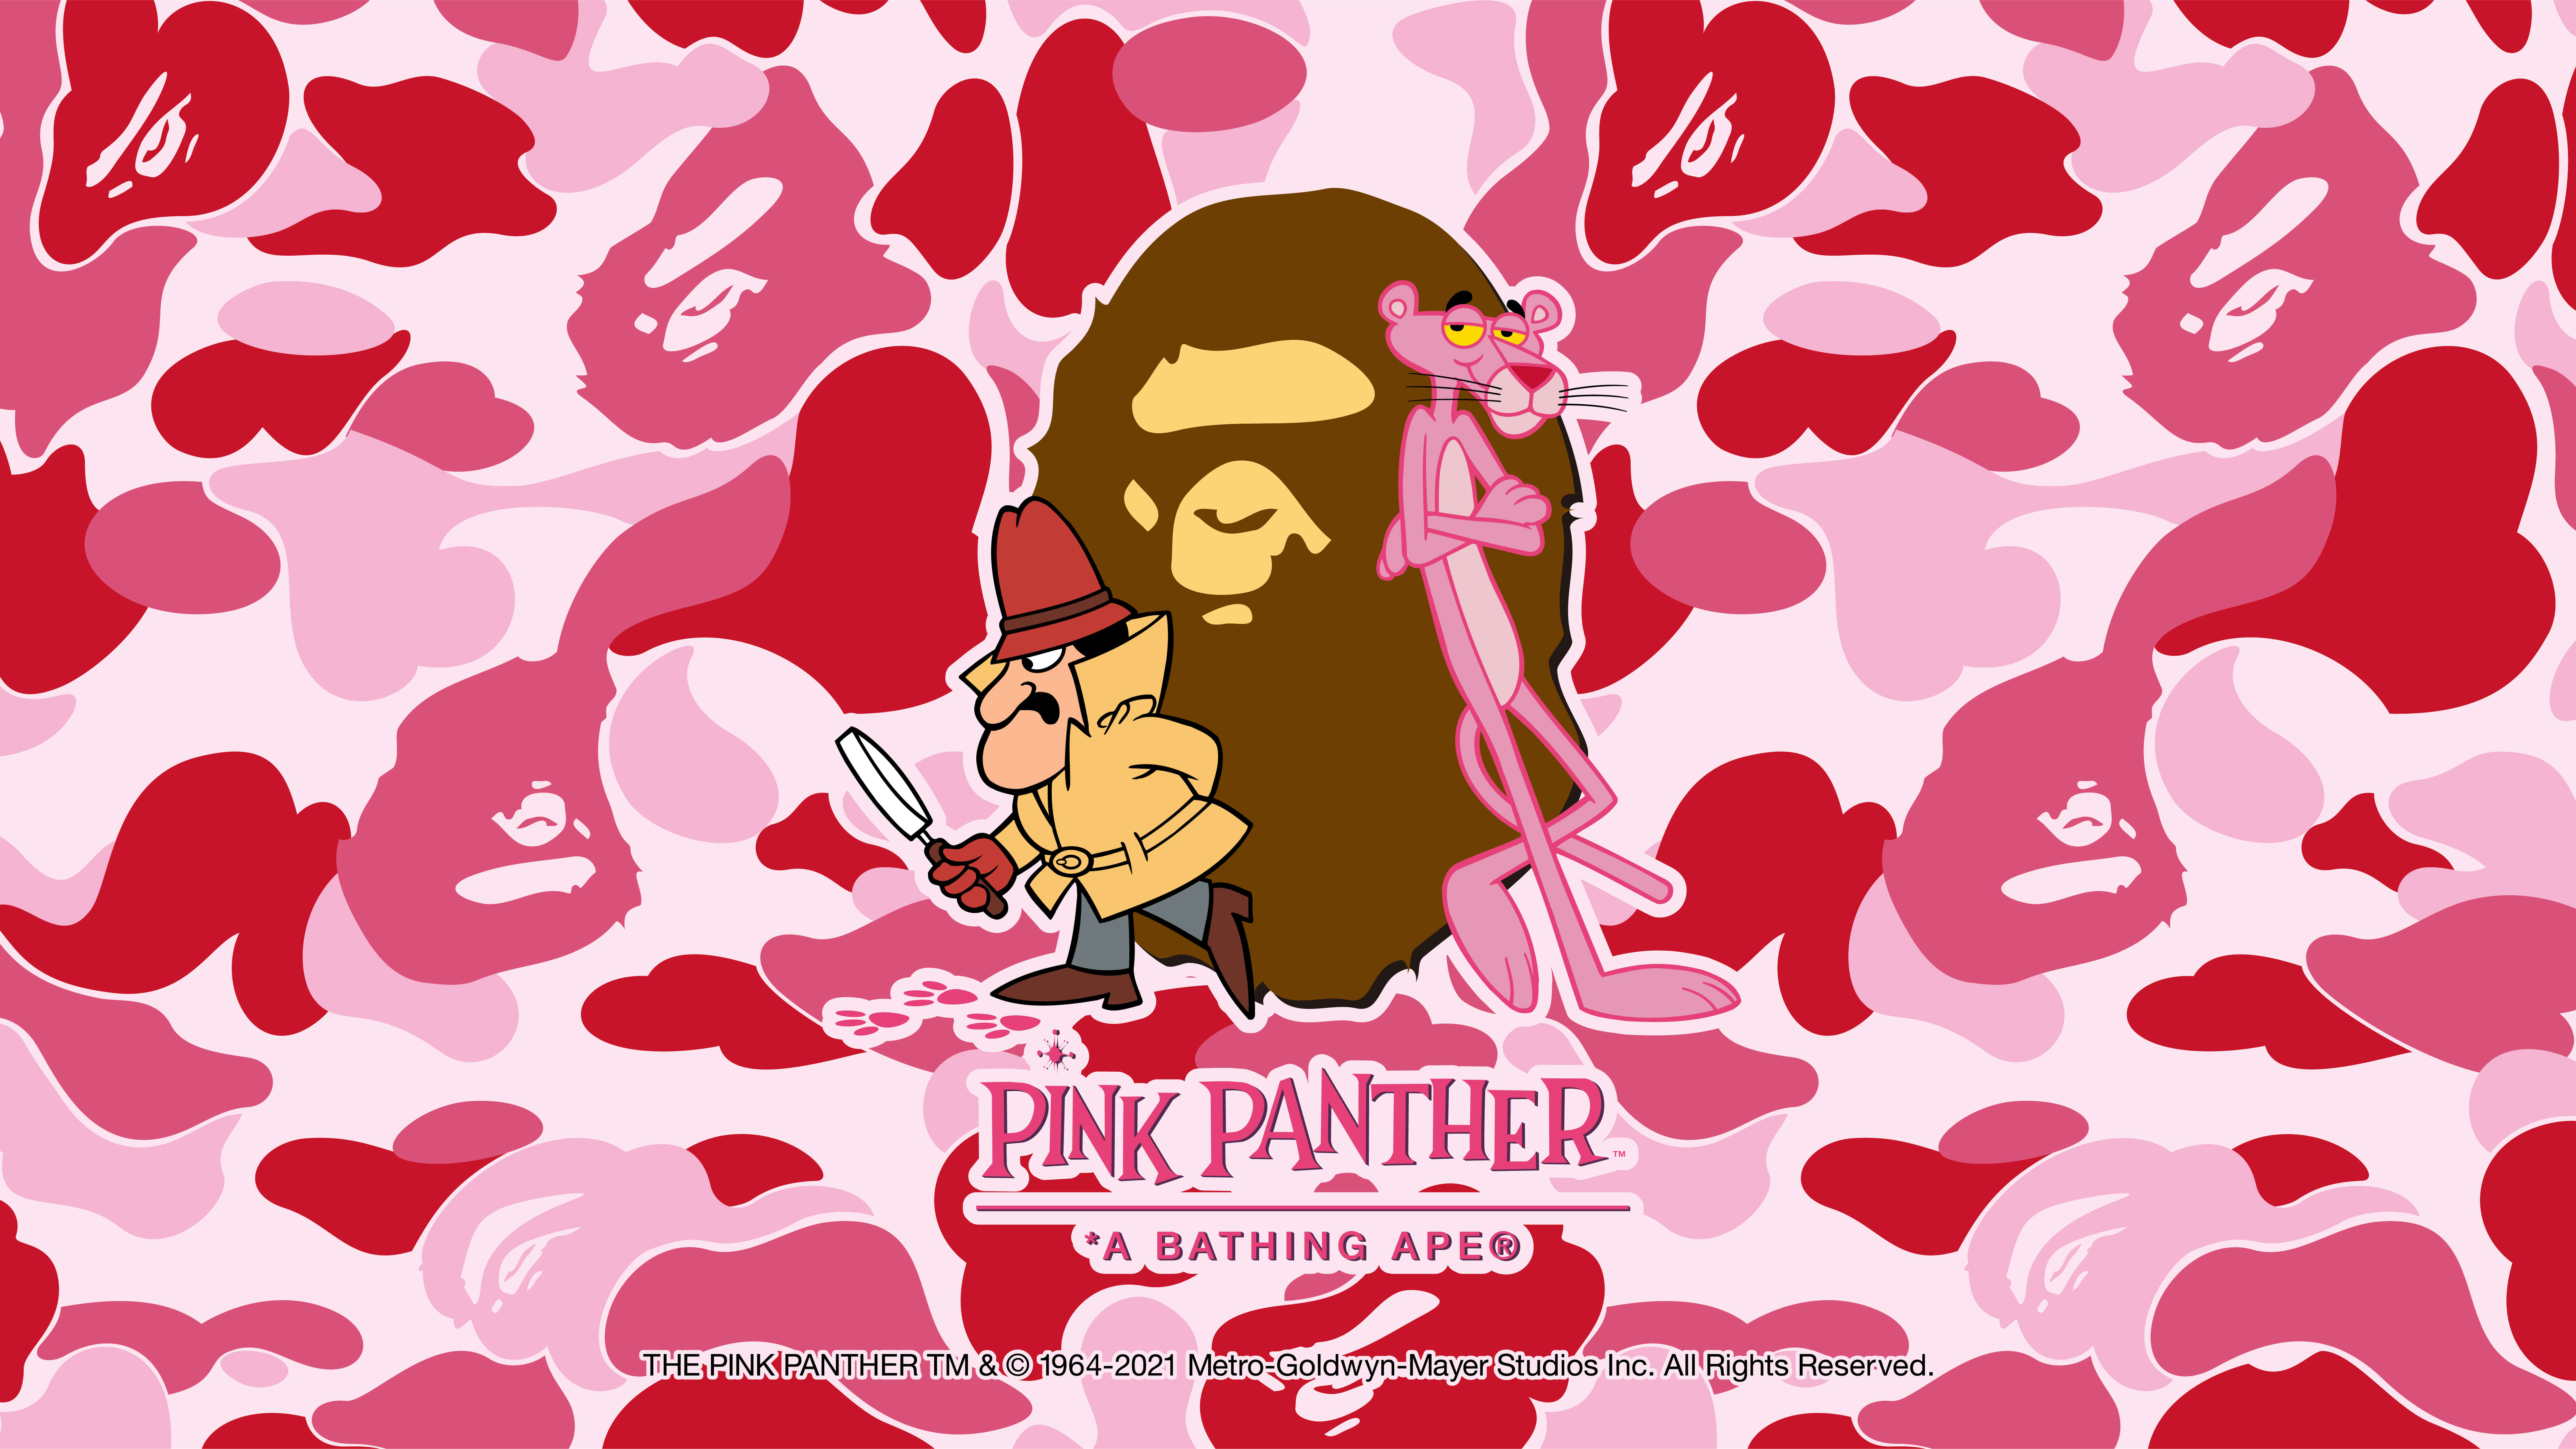 A BATHING APE® × PINK PANTHER1